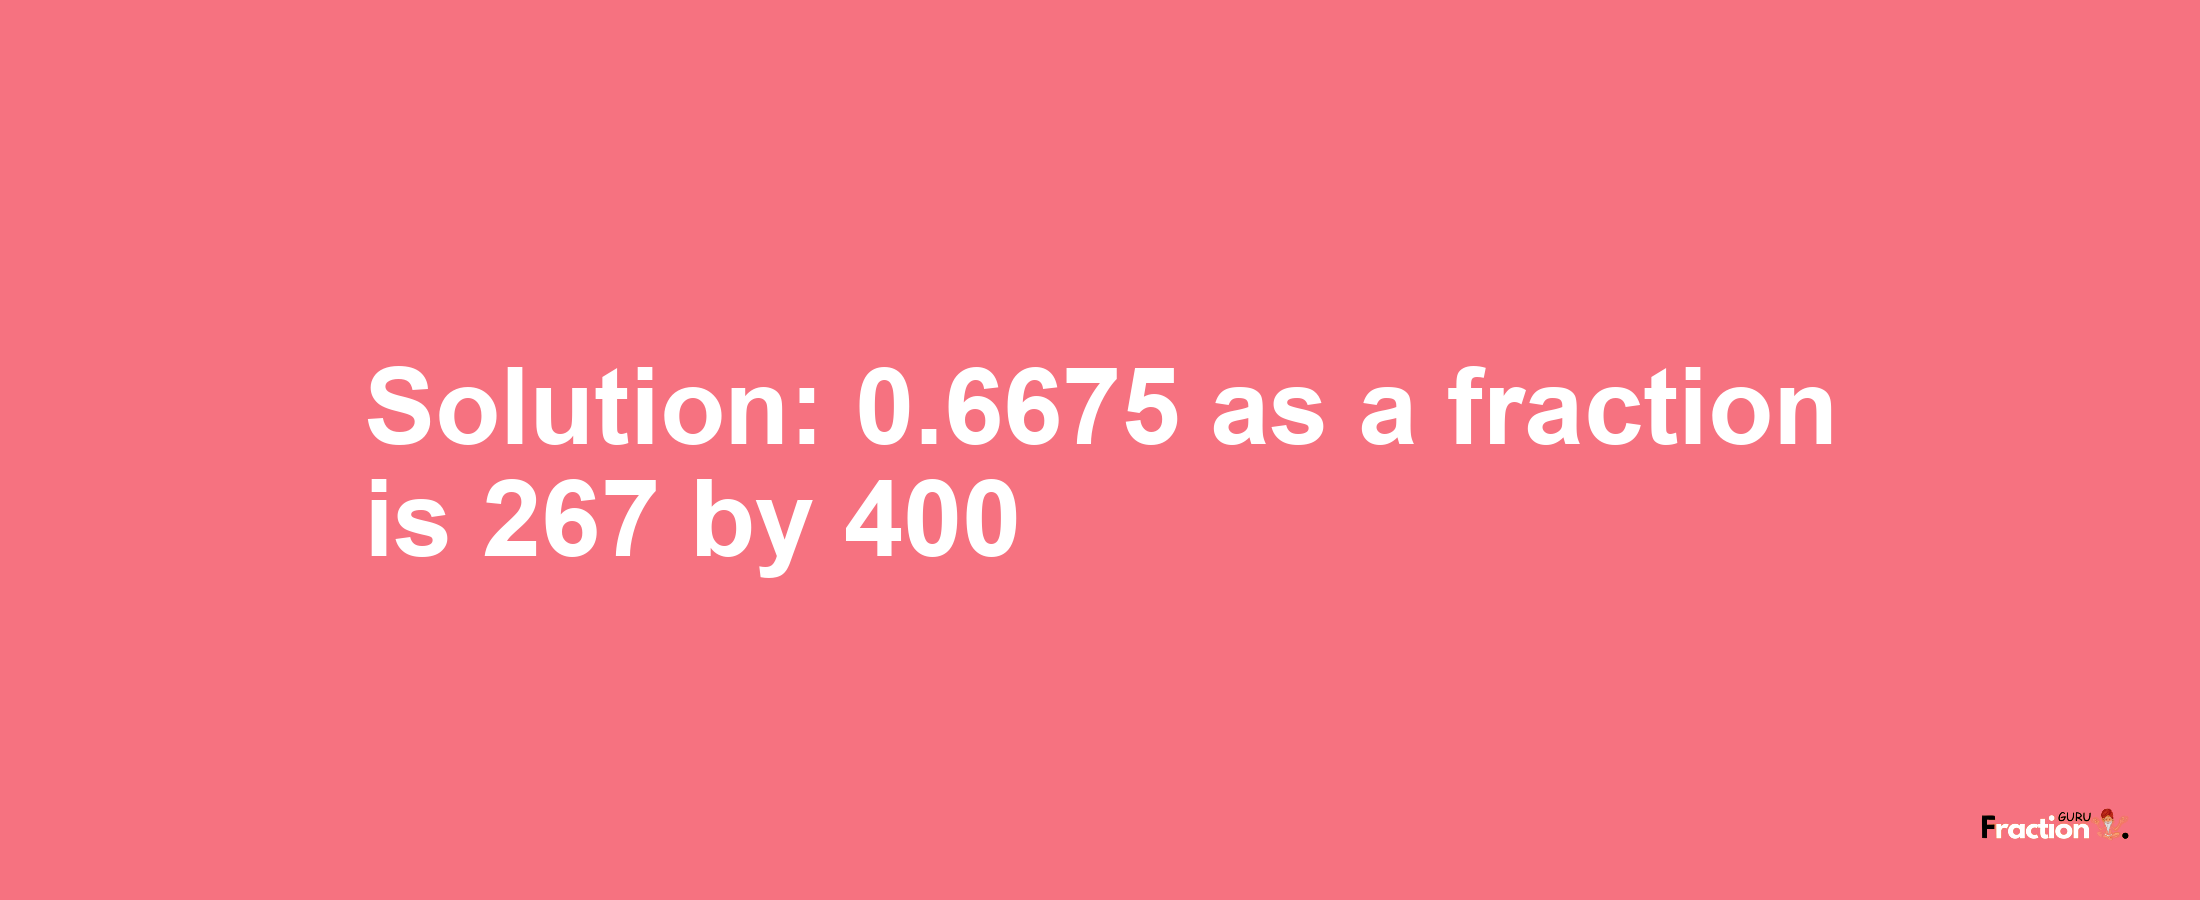 Solution:0.6675 as a fraction is 267/400